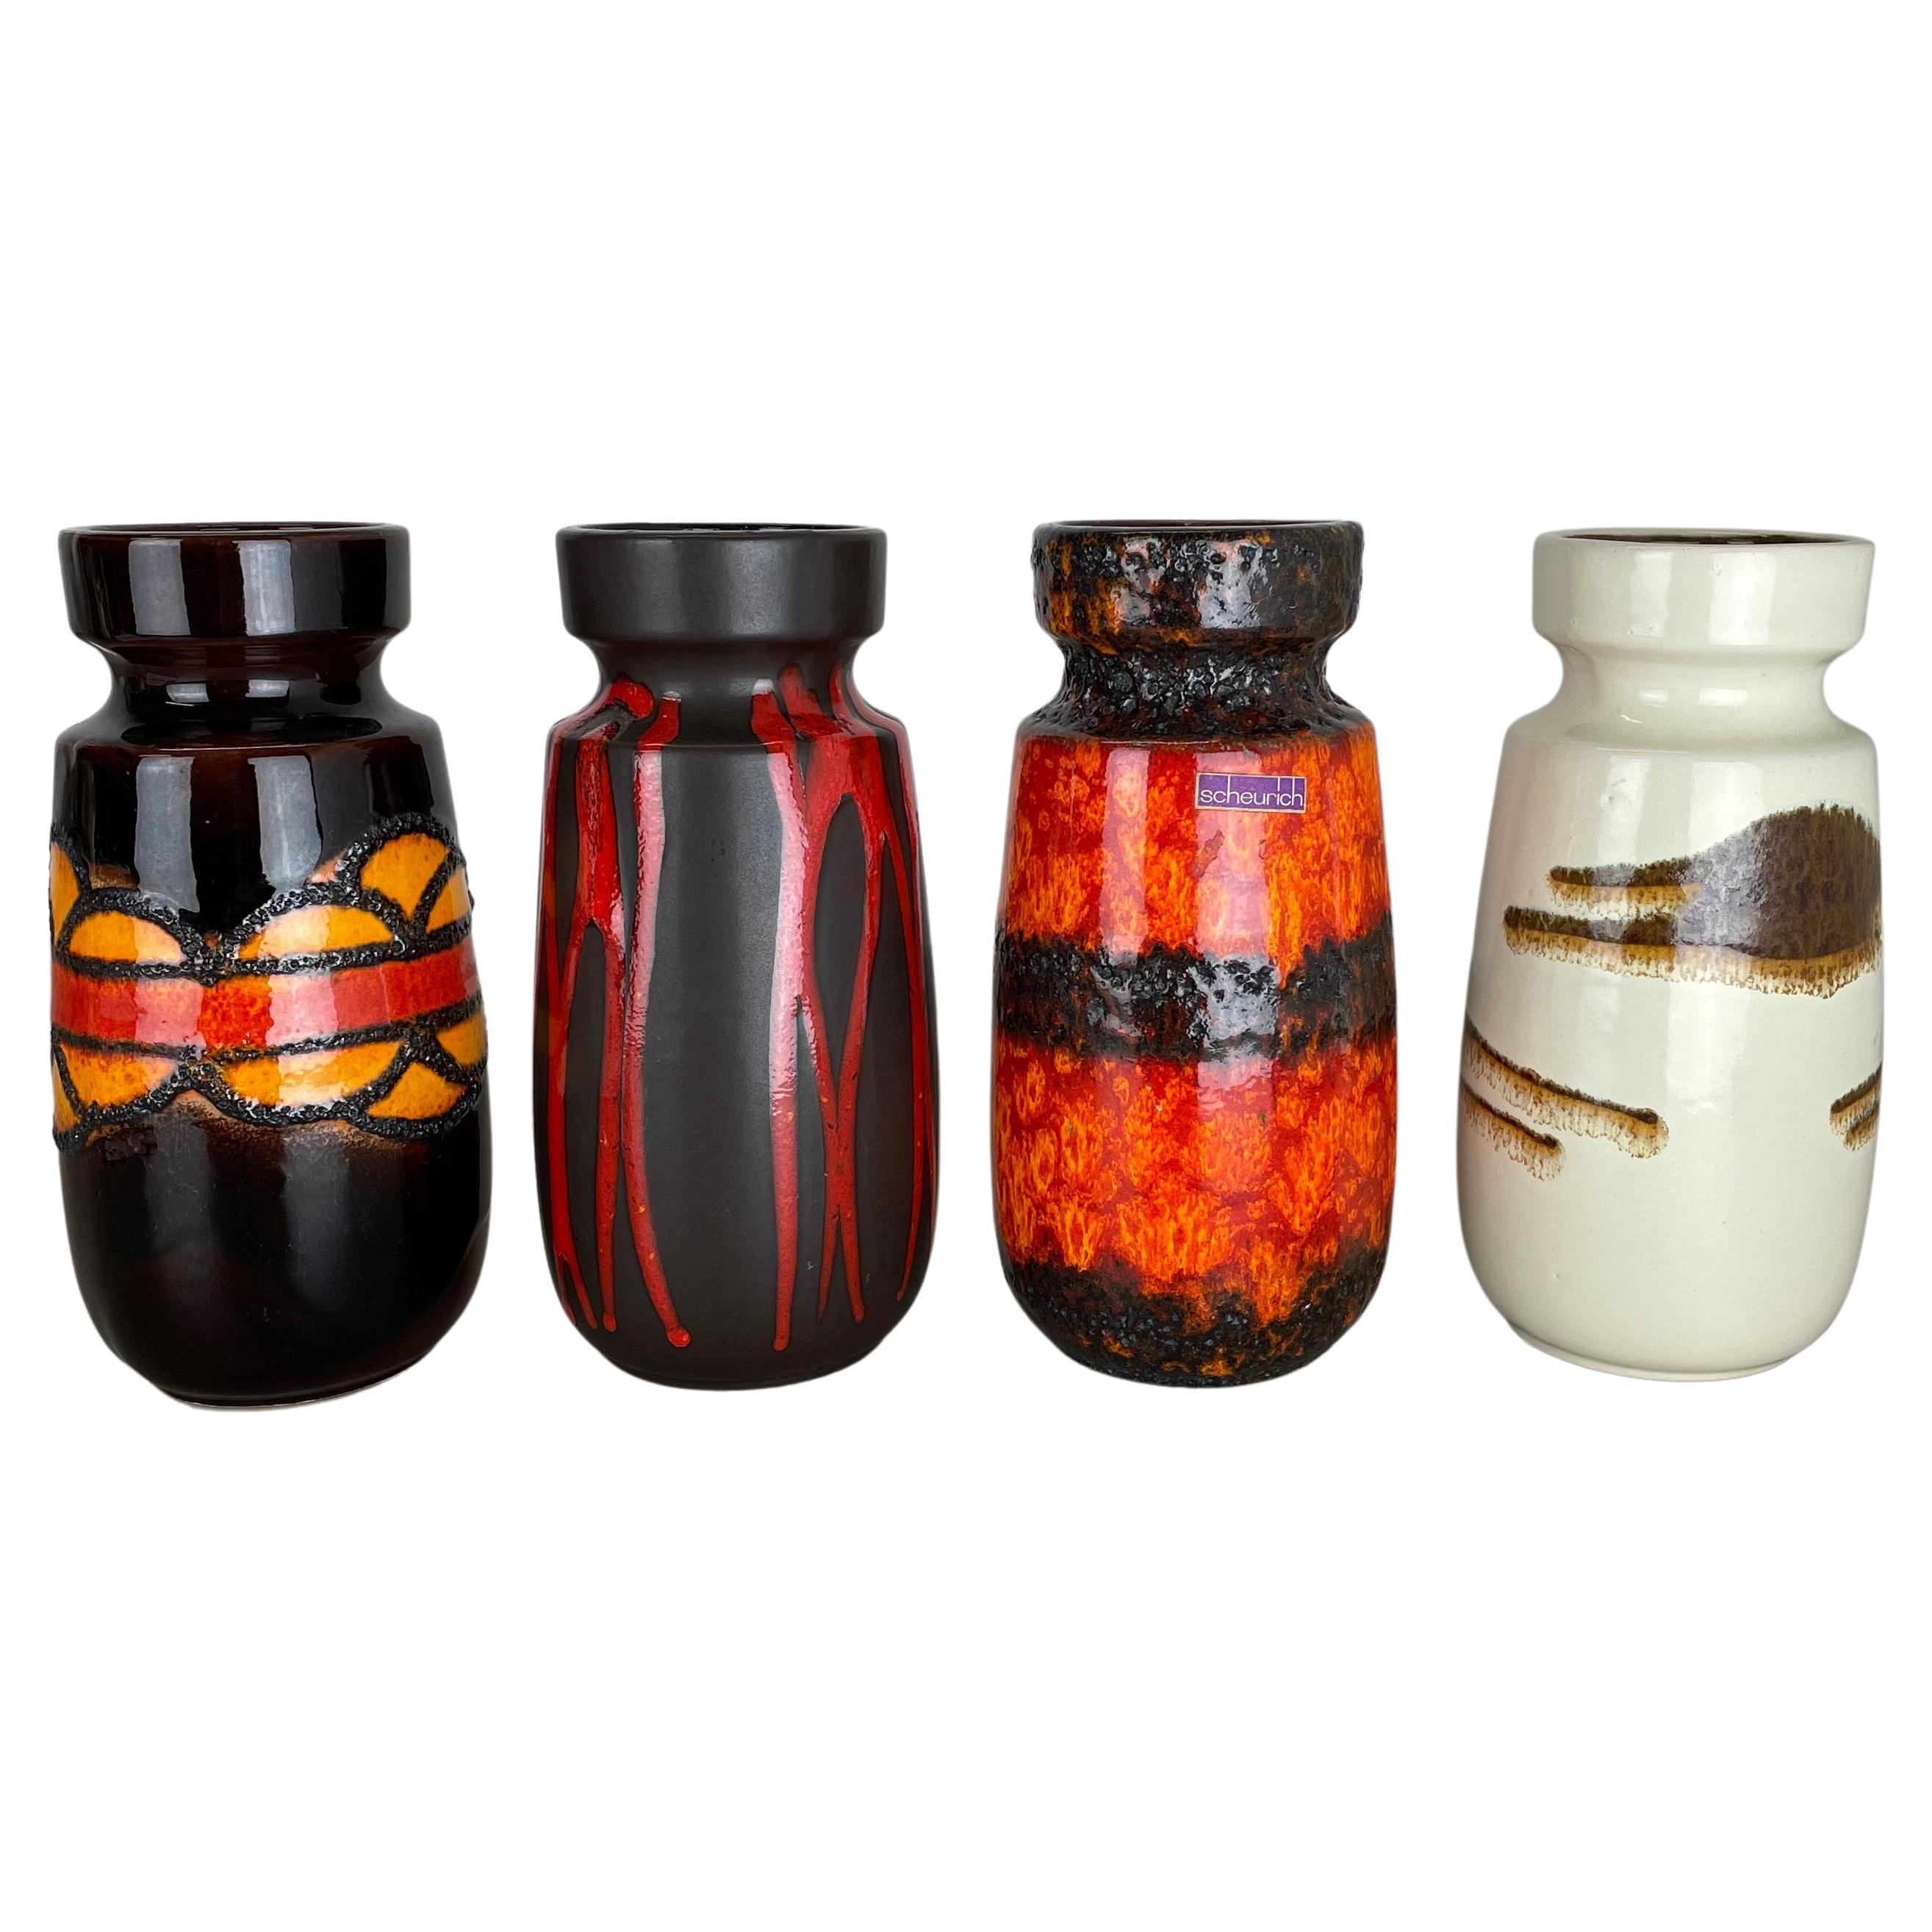 Set of Four Vintage Pottery Fat Lava Vases Made by Scheurich, Germany, 1970s For Sale